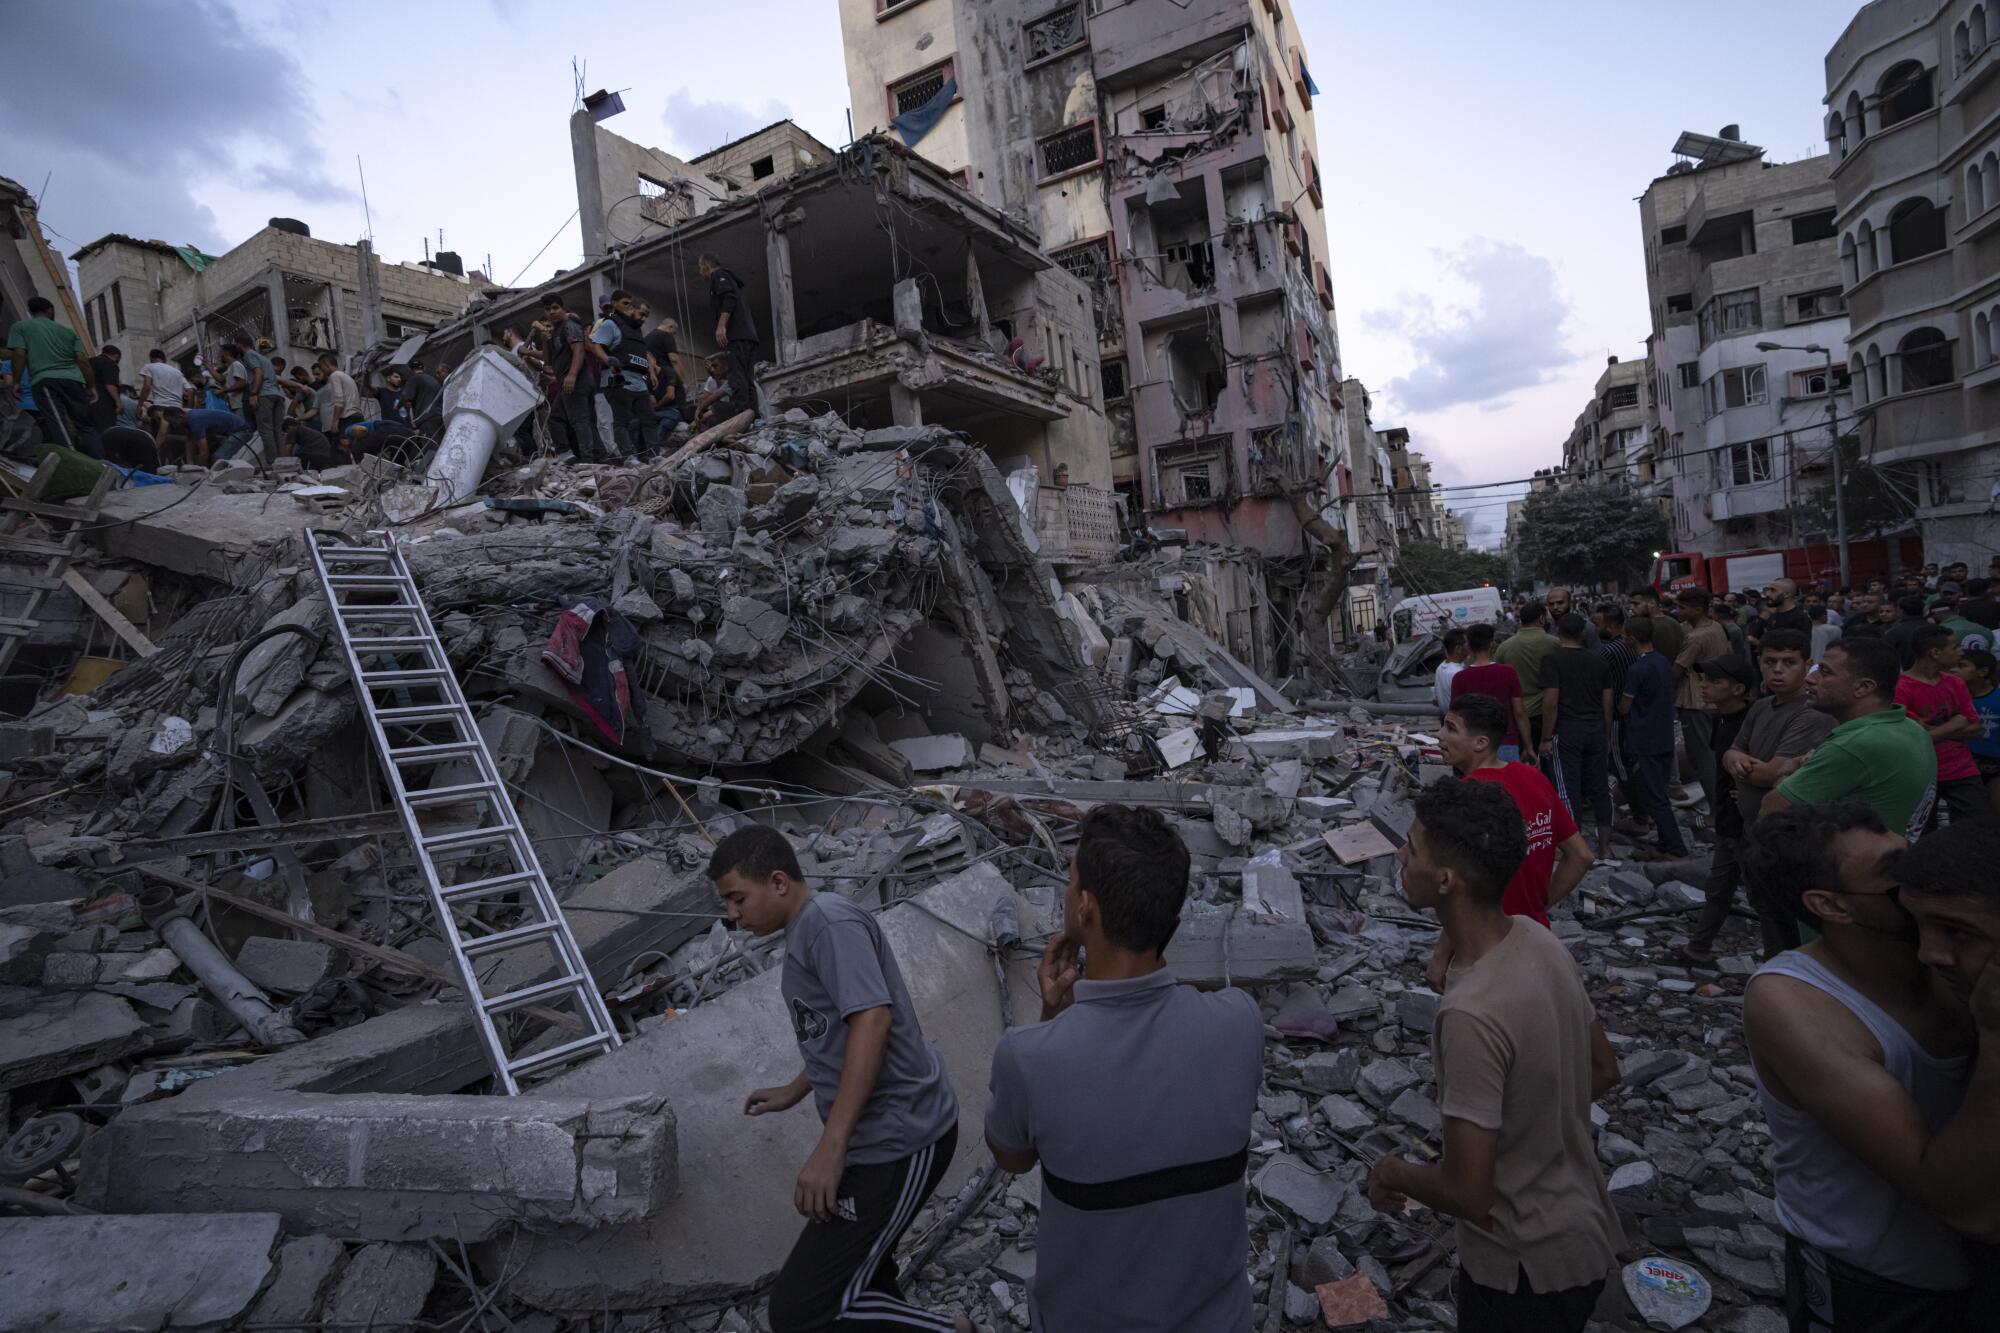 People search for survivors in the rubble of Gaza homes.